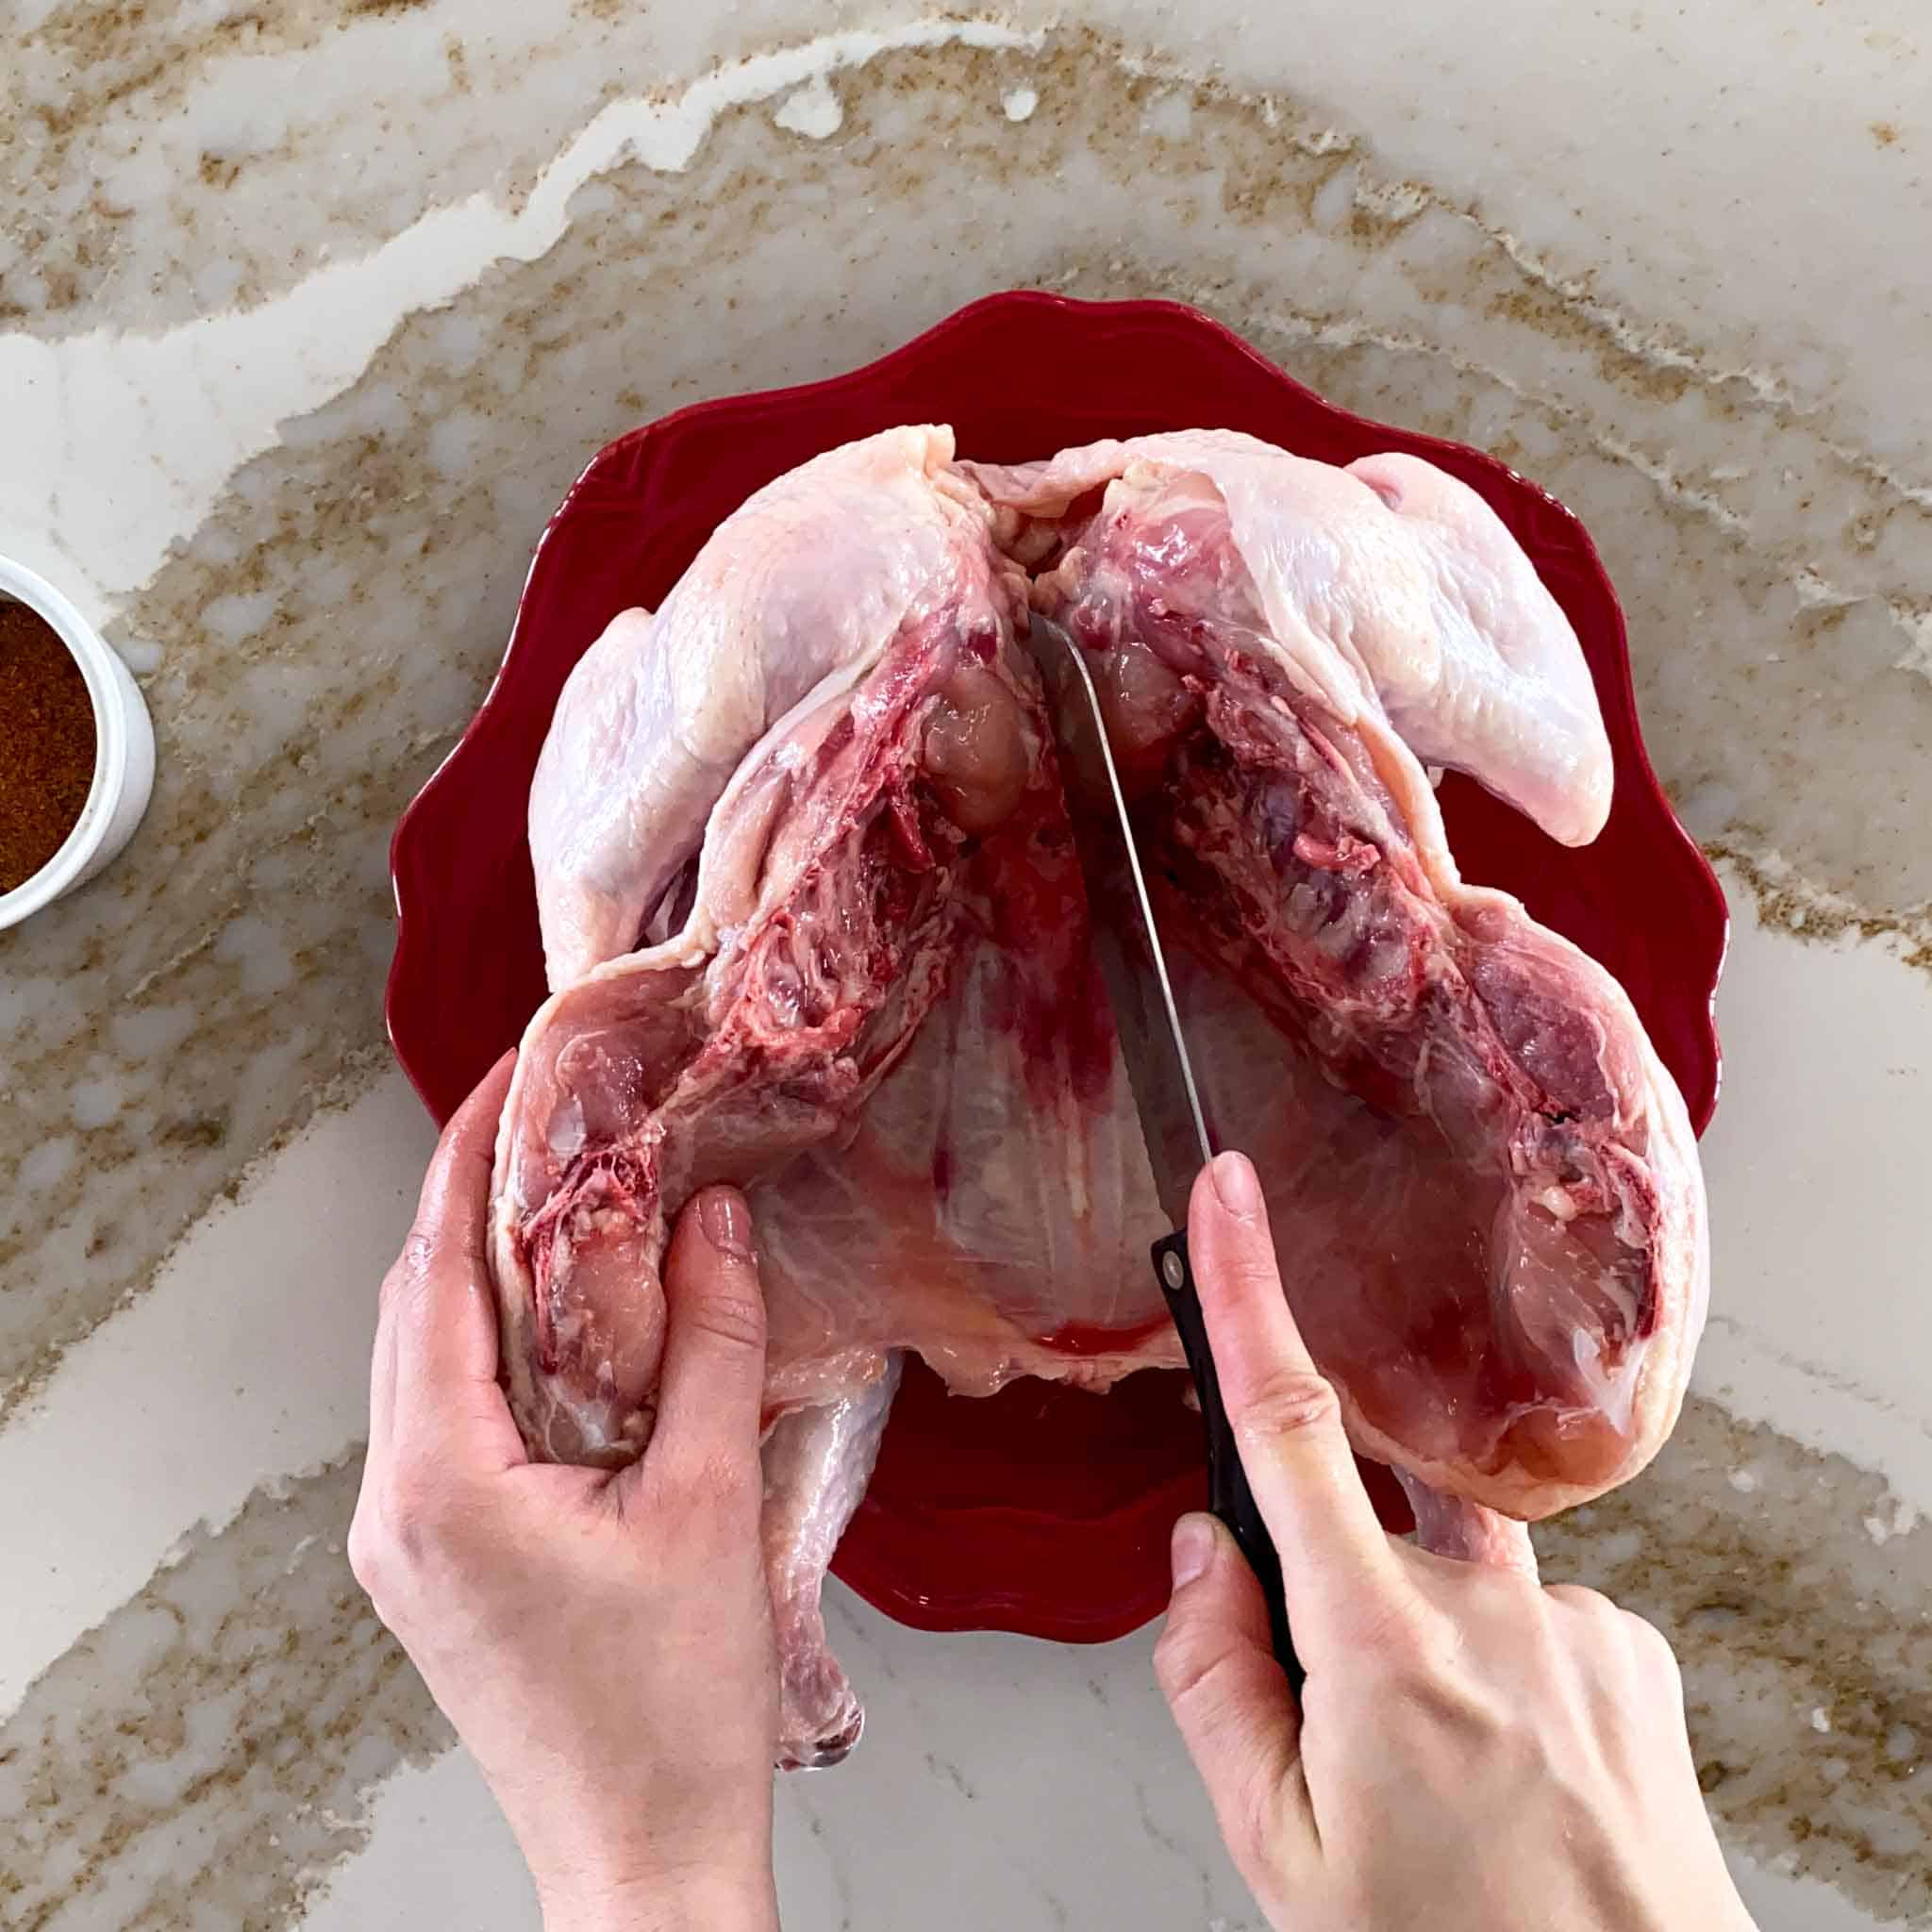 Cutting the breast bone of a spatchcock chicken open to help flatten it before smoking.